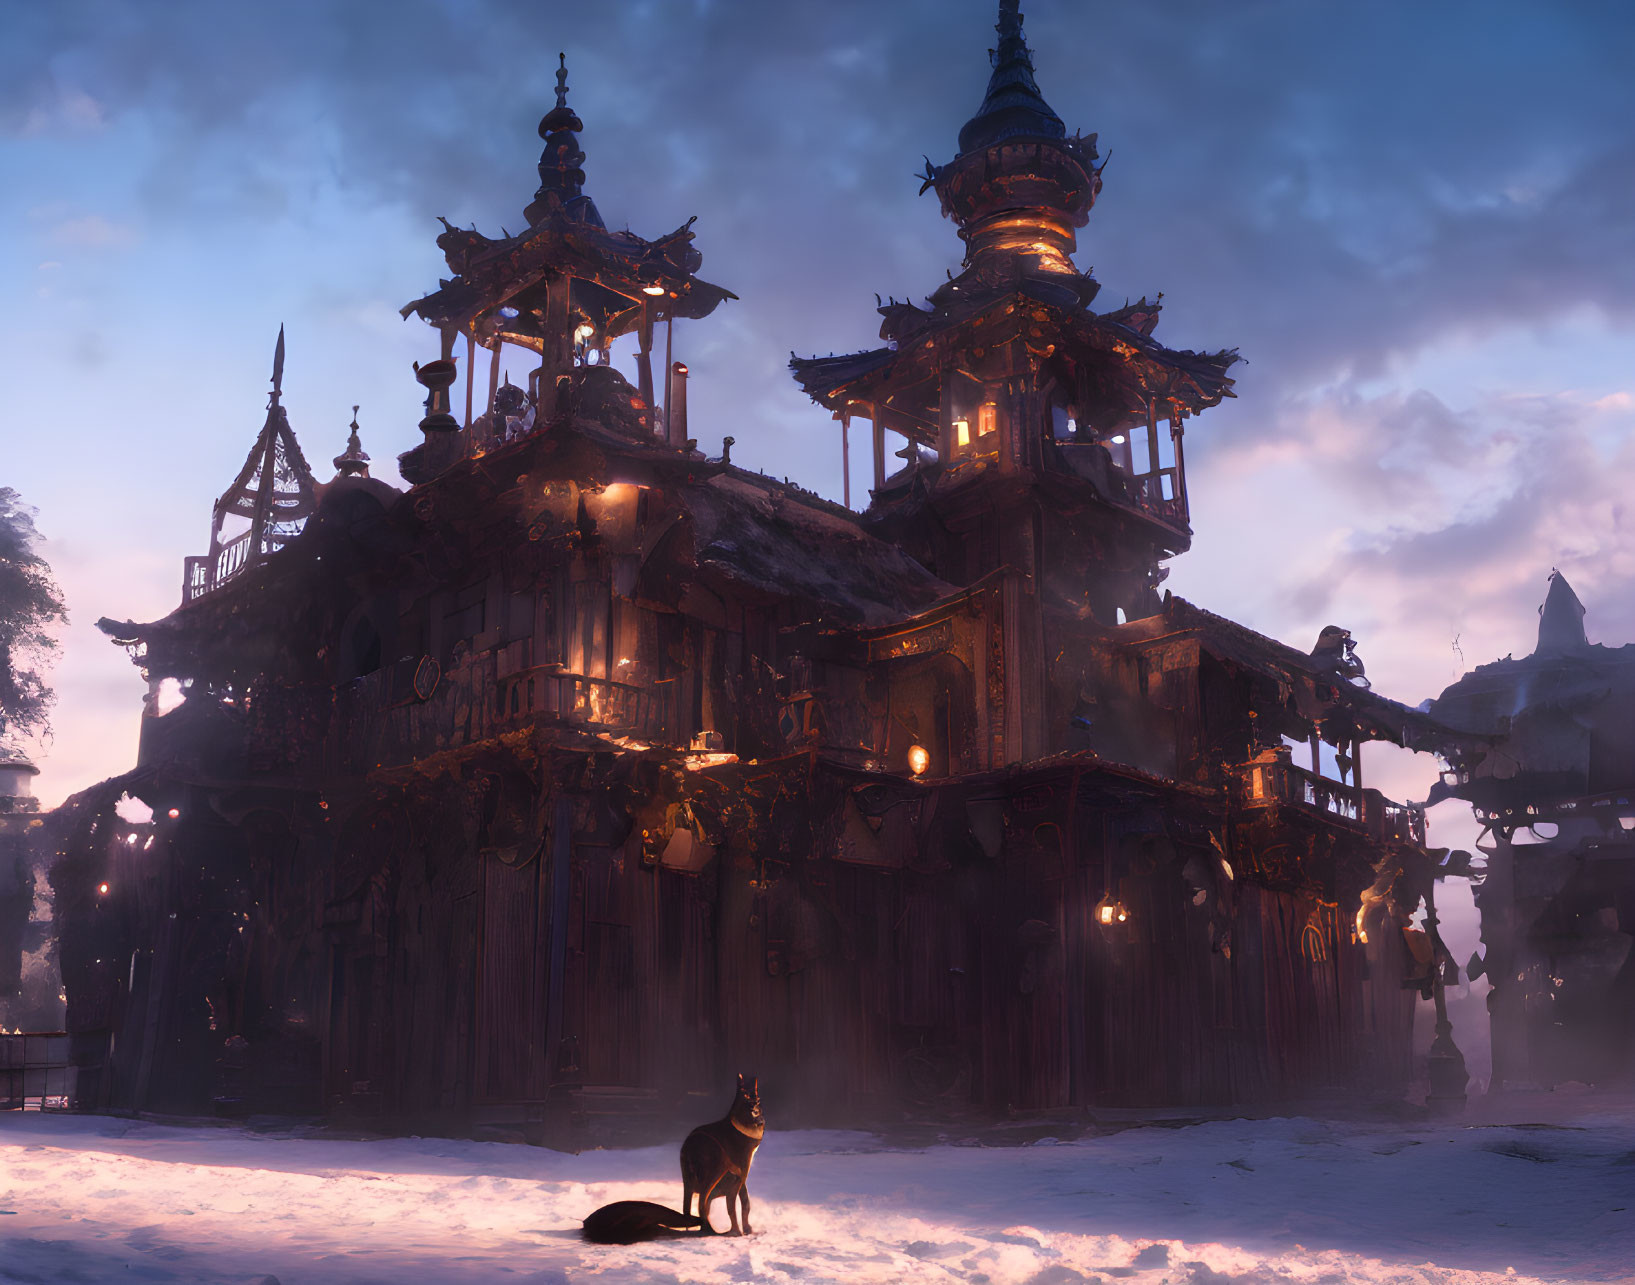 Ornate multi-tiered wooden structure in mystical twilight snowscape